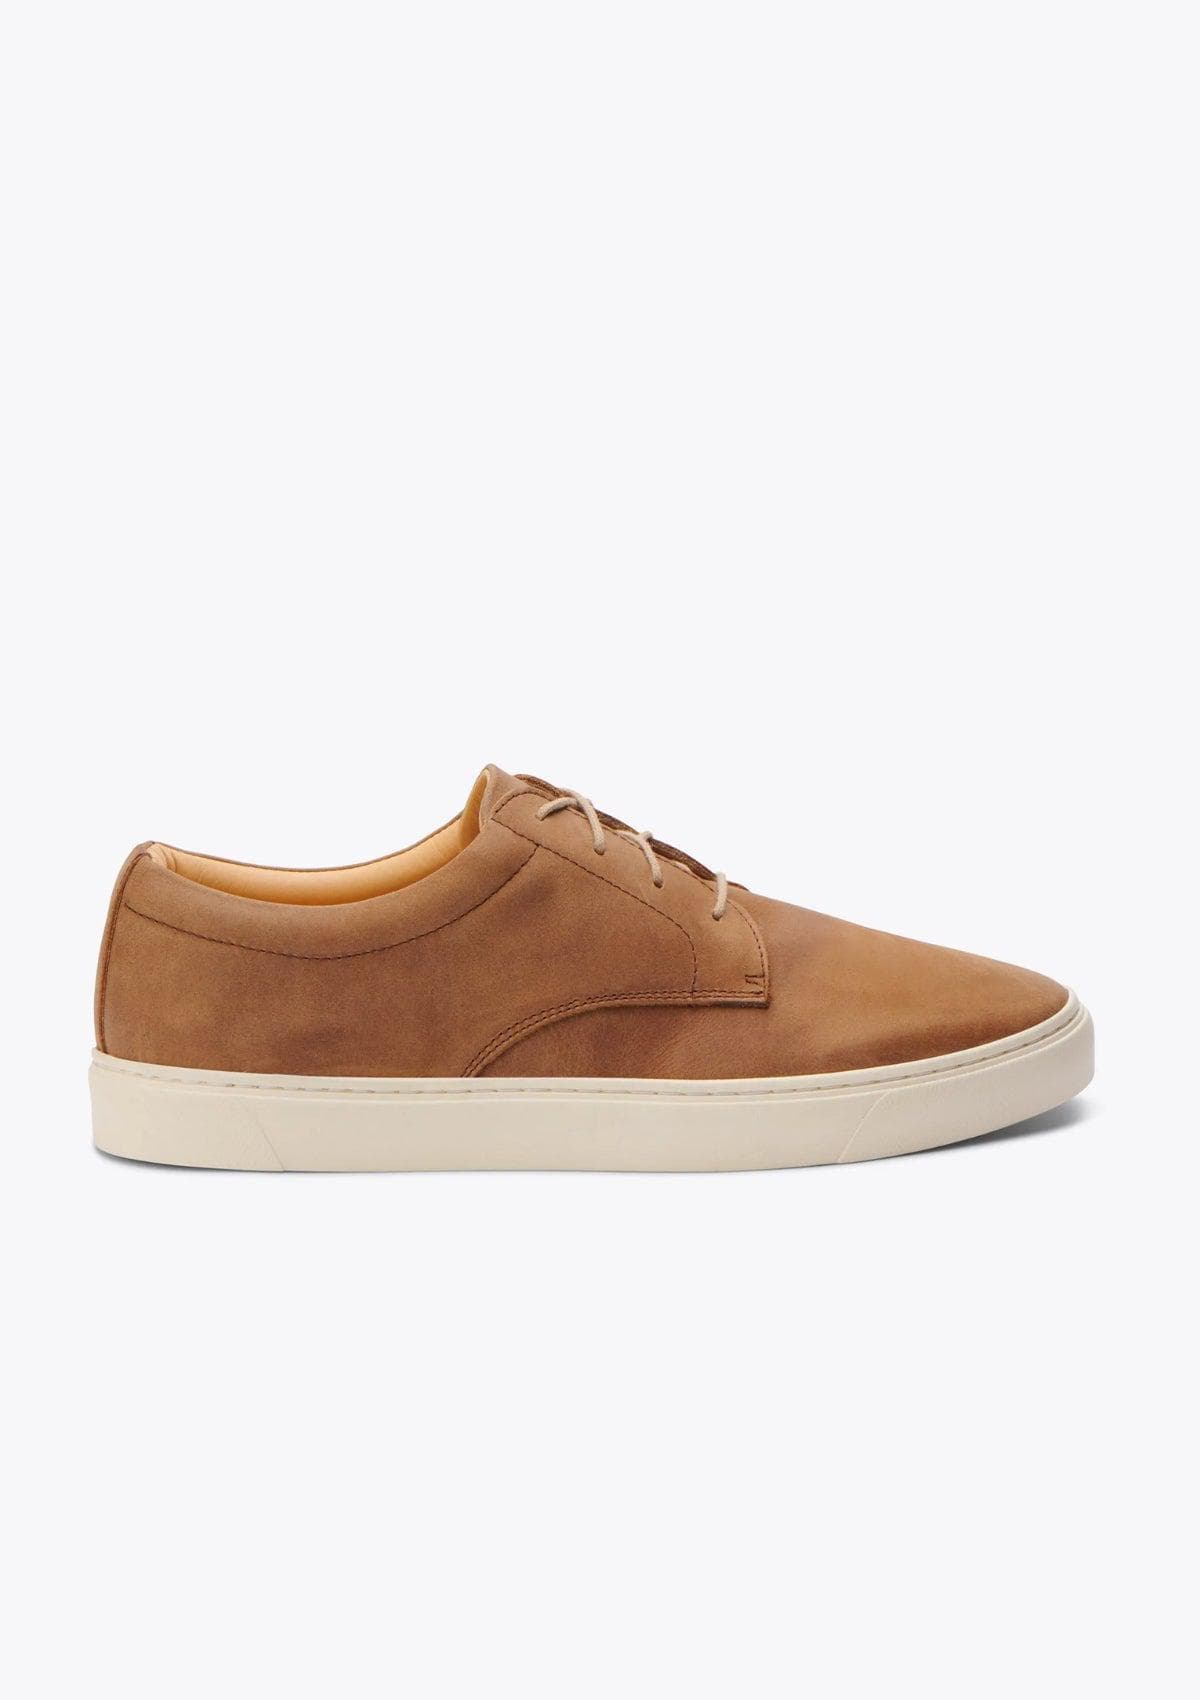 Nisolo Everyday Low Top Sneaker - Tobacco